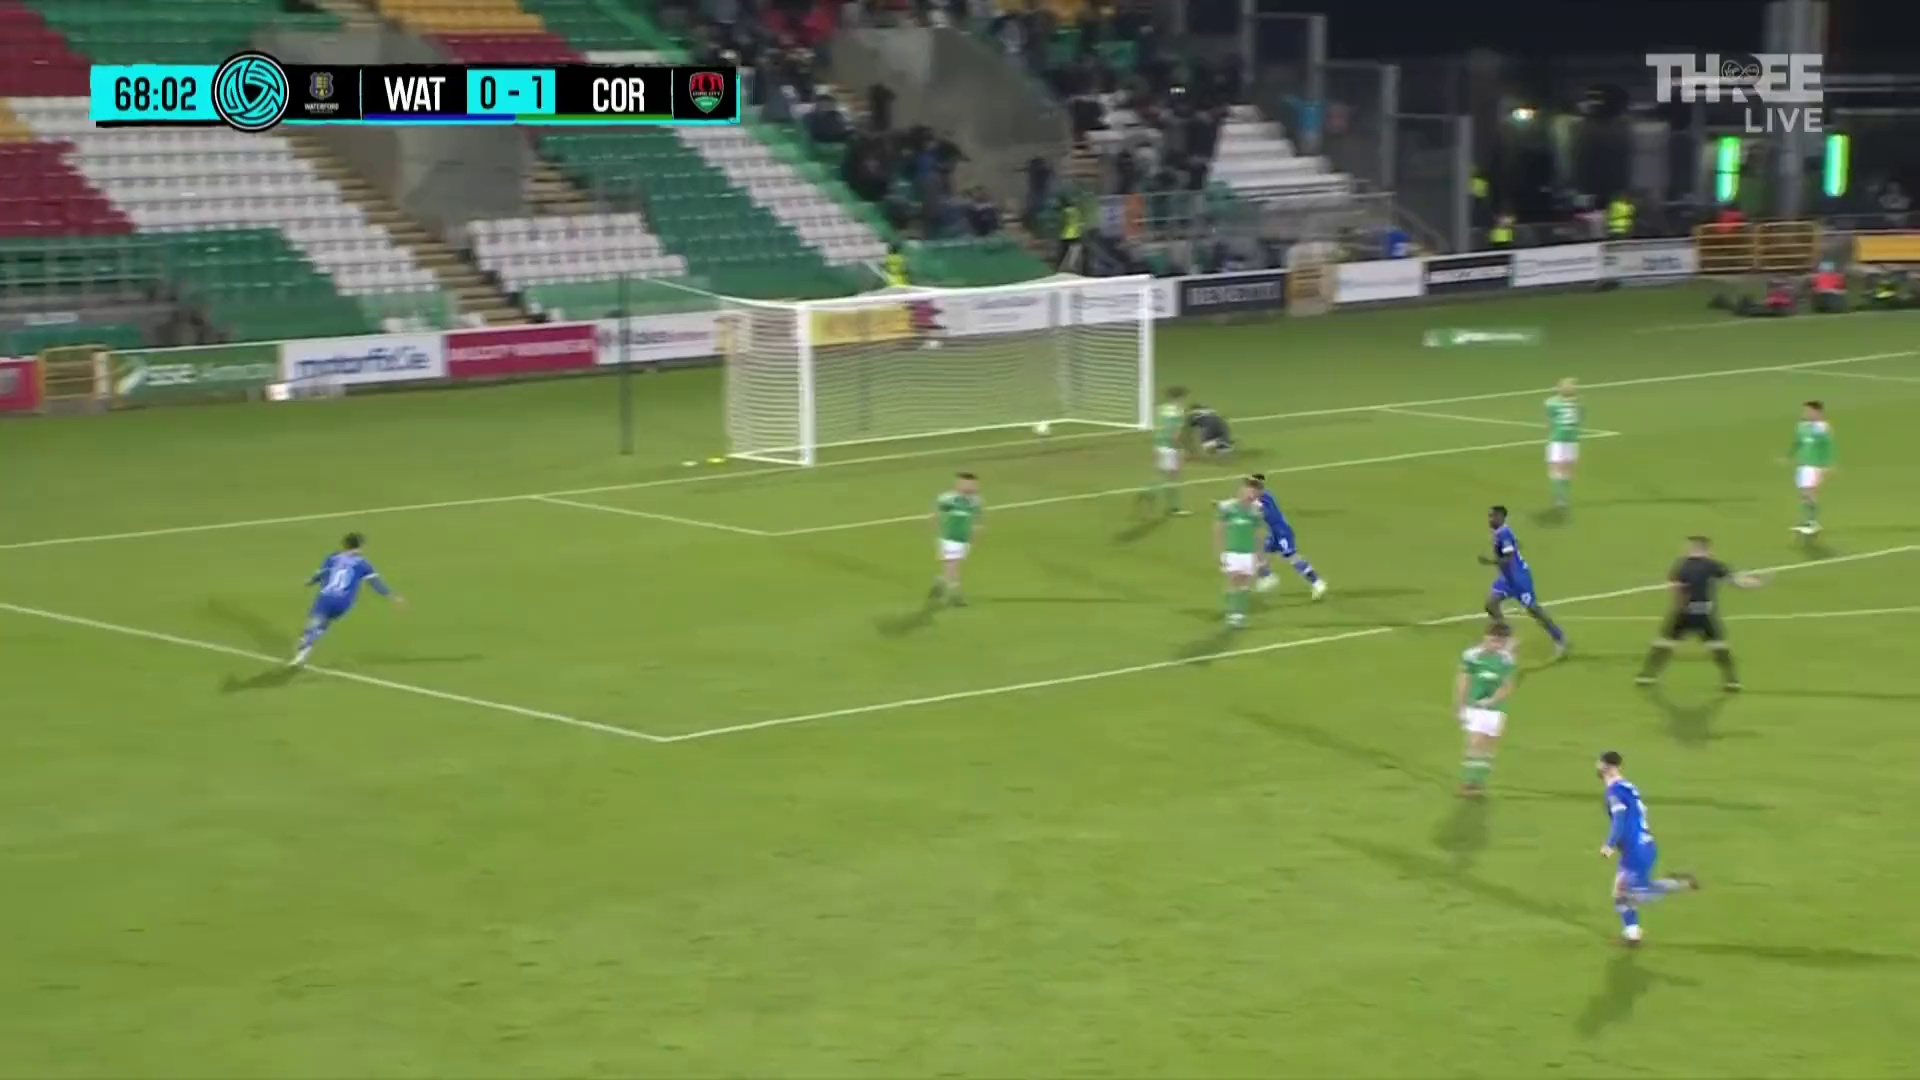 Waterford [1] - 1 Cork City - Connor Parsons 68' (great goal)